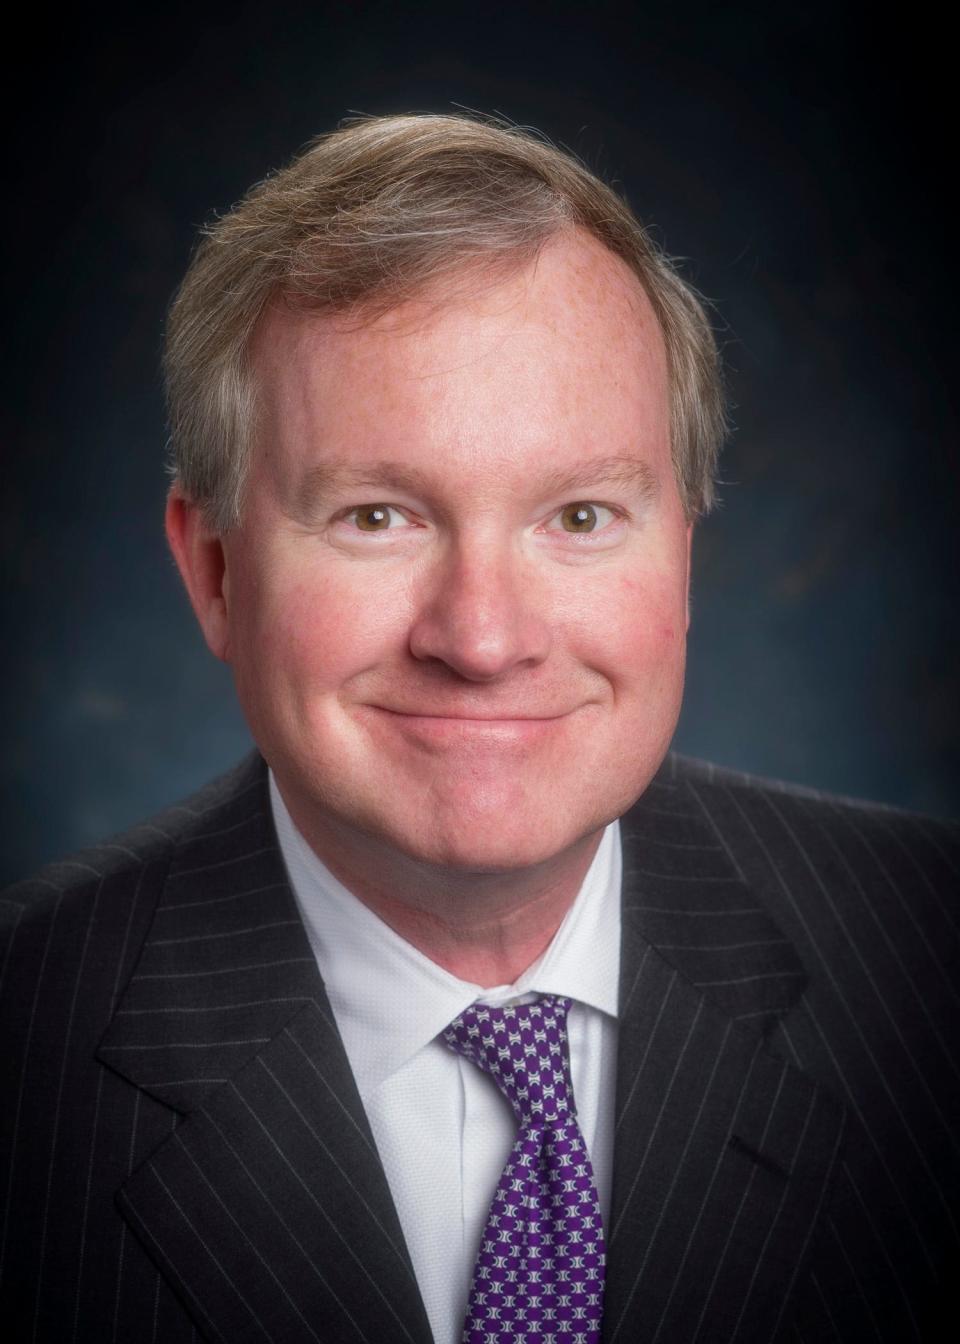 Porter Banister is the vice chancellor for state affairs at the University of Alabama.